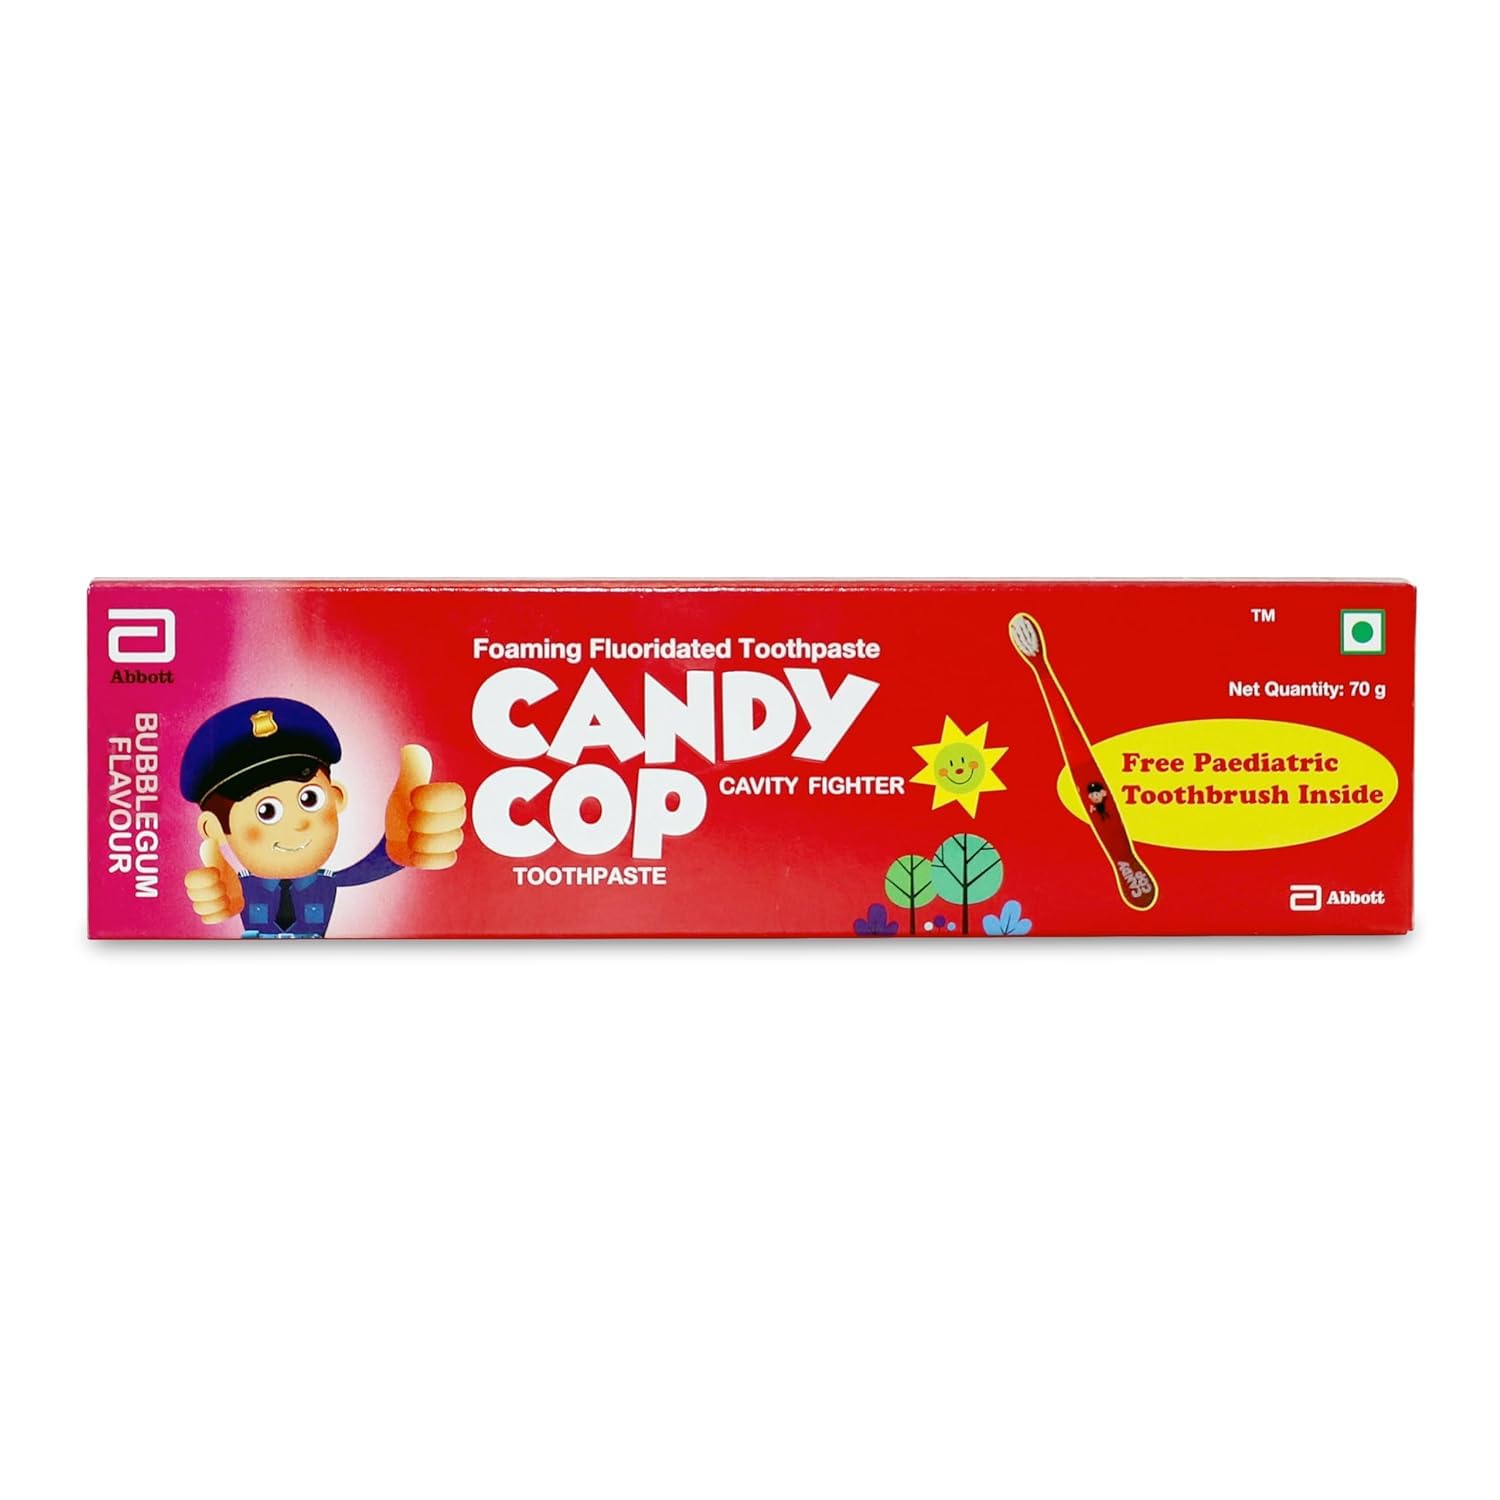 Candy Cop Foaming Fluoridated Toothpaste Bubblegum with Paediatric Toothbrush Inside Free